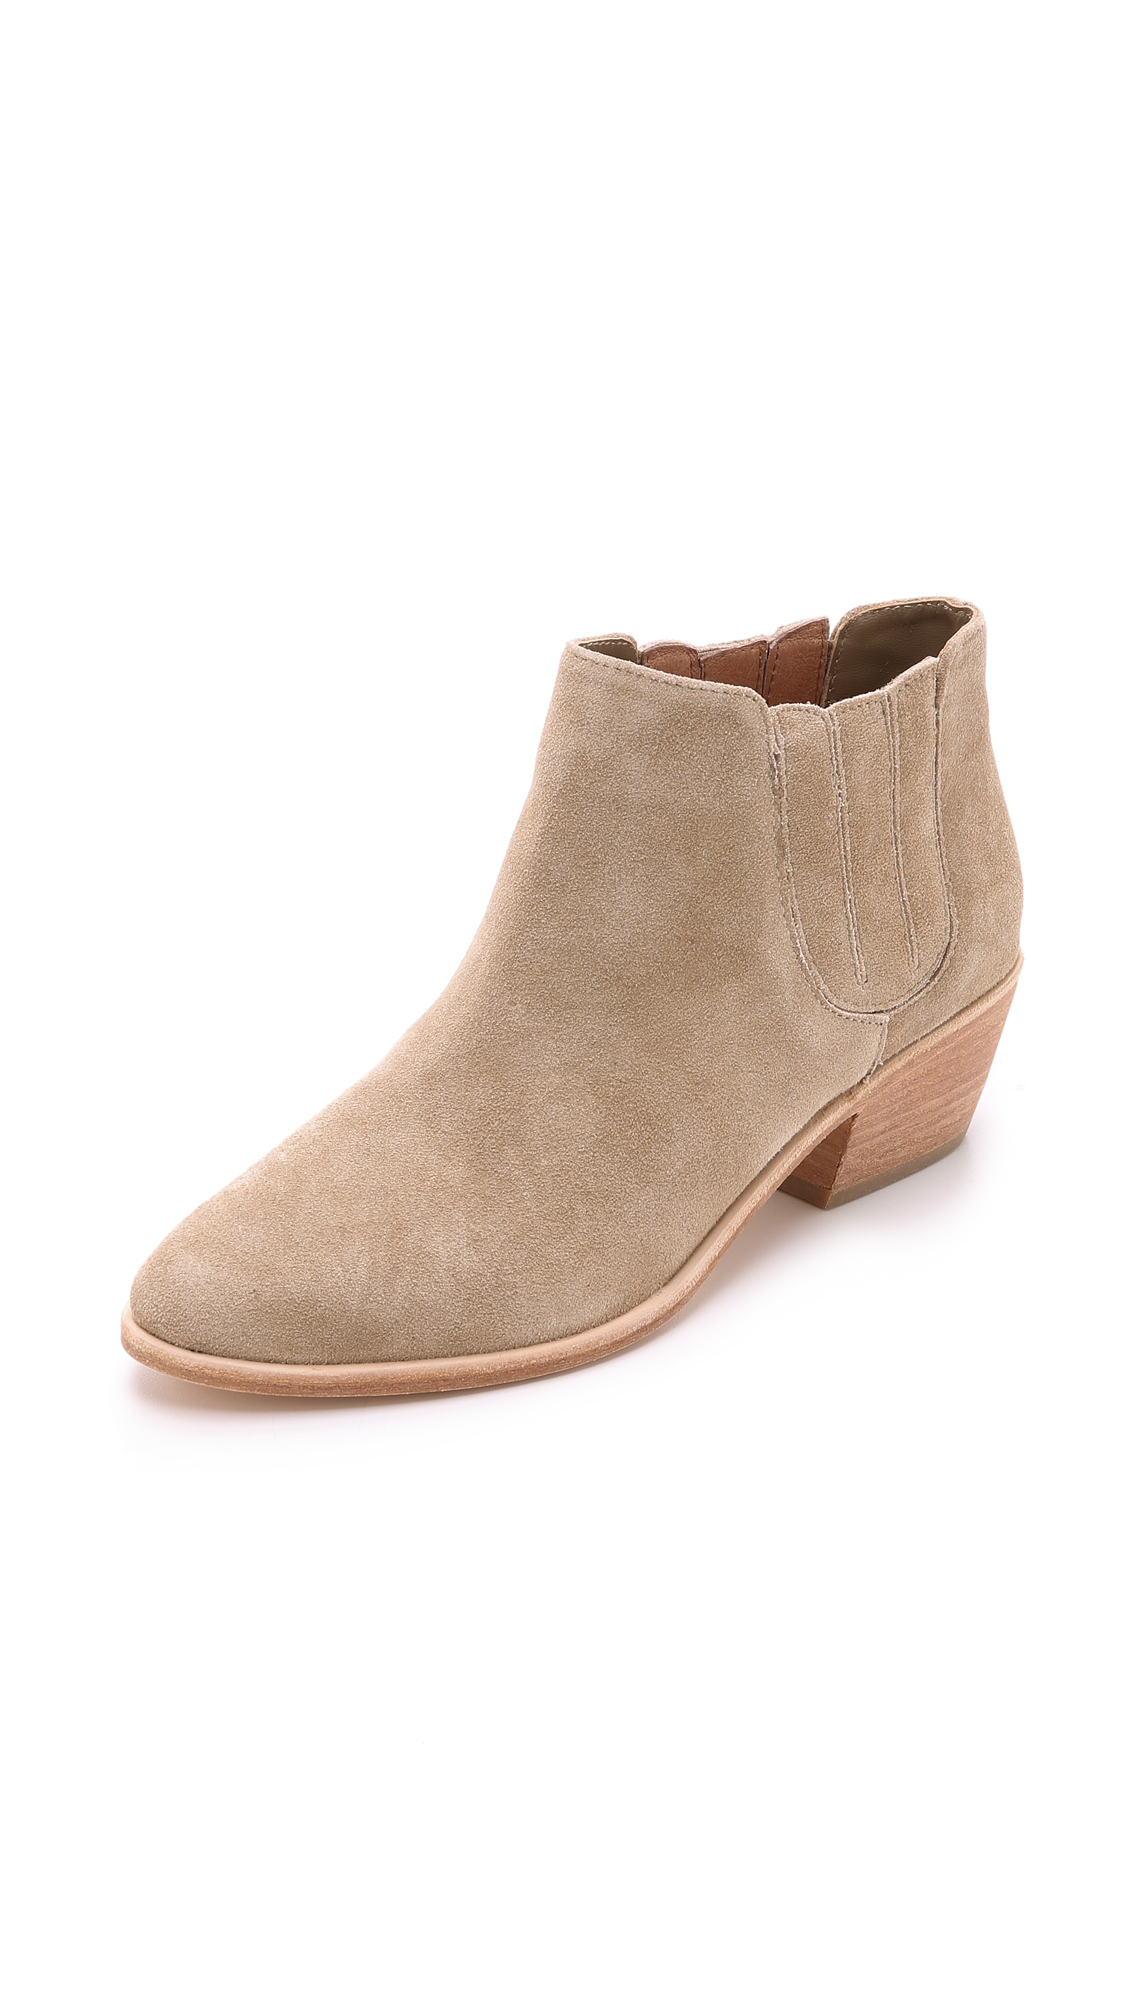 joie cement barlow suede booties cement gray product 2 559951583 normal